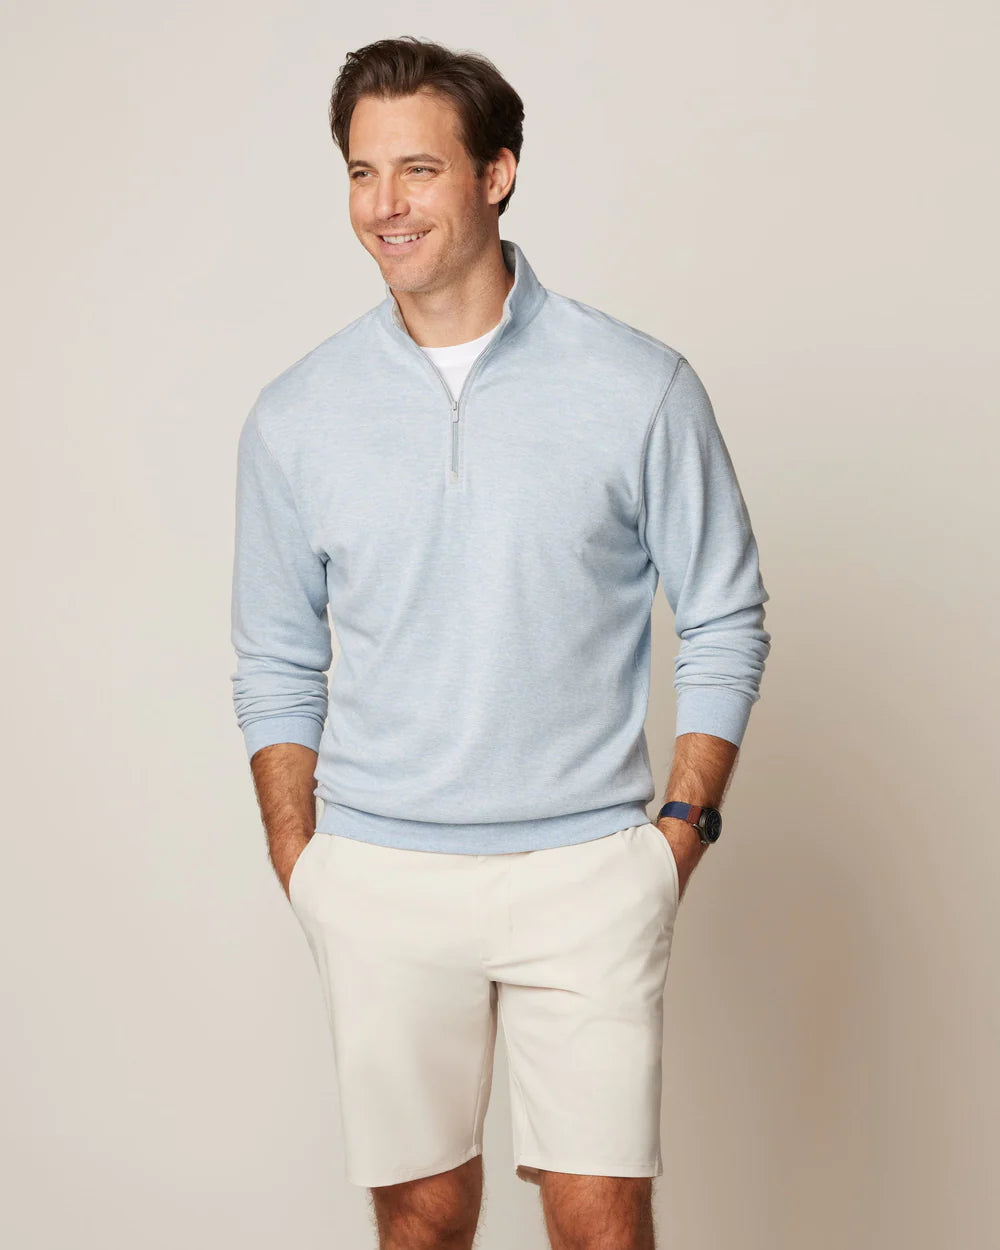 This pullover is constructed with a lightweight, soft, and durable cotton blend fabric, resulting in a crisp and clean appearance that is both stylish and comfortable.